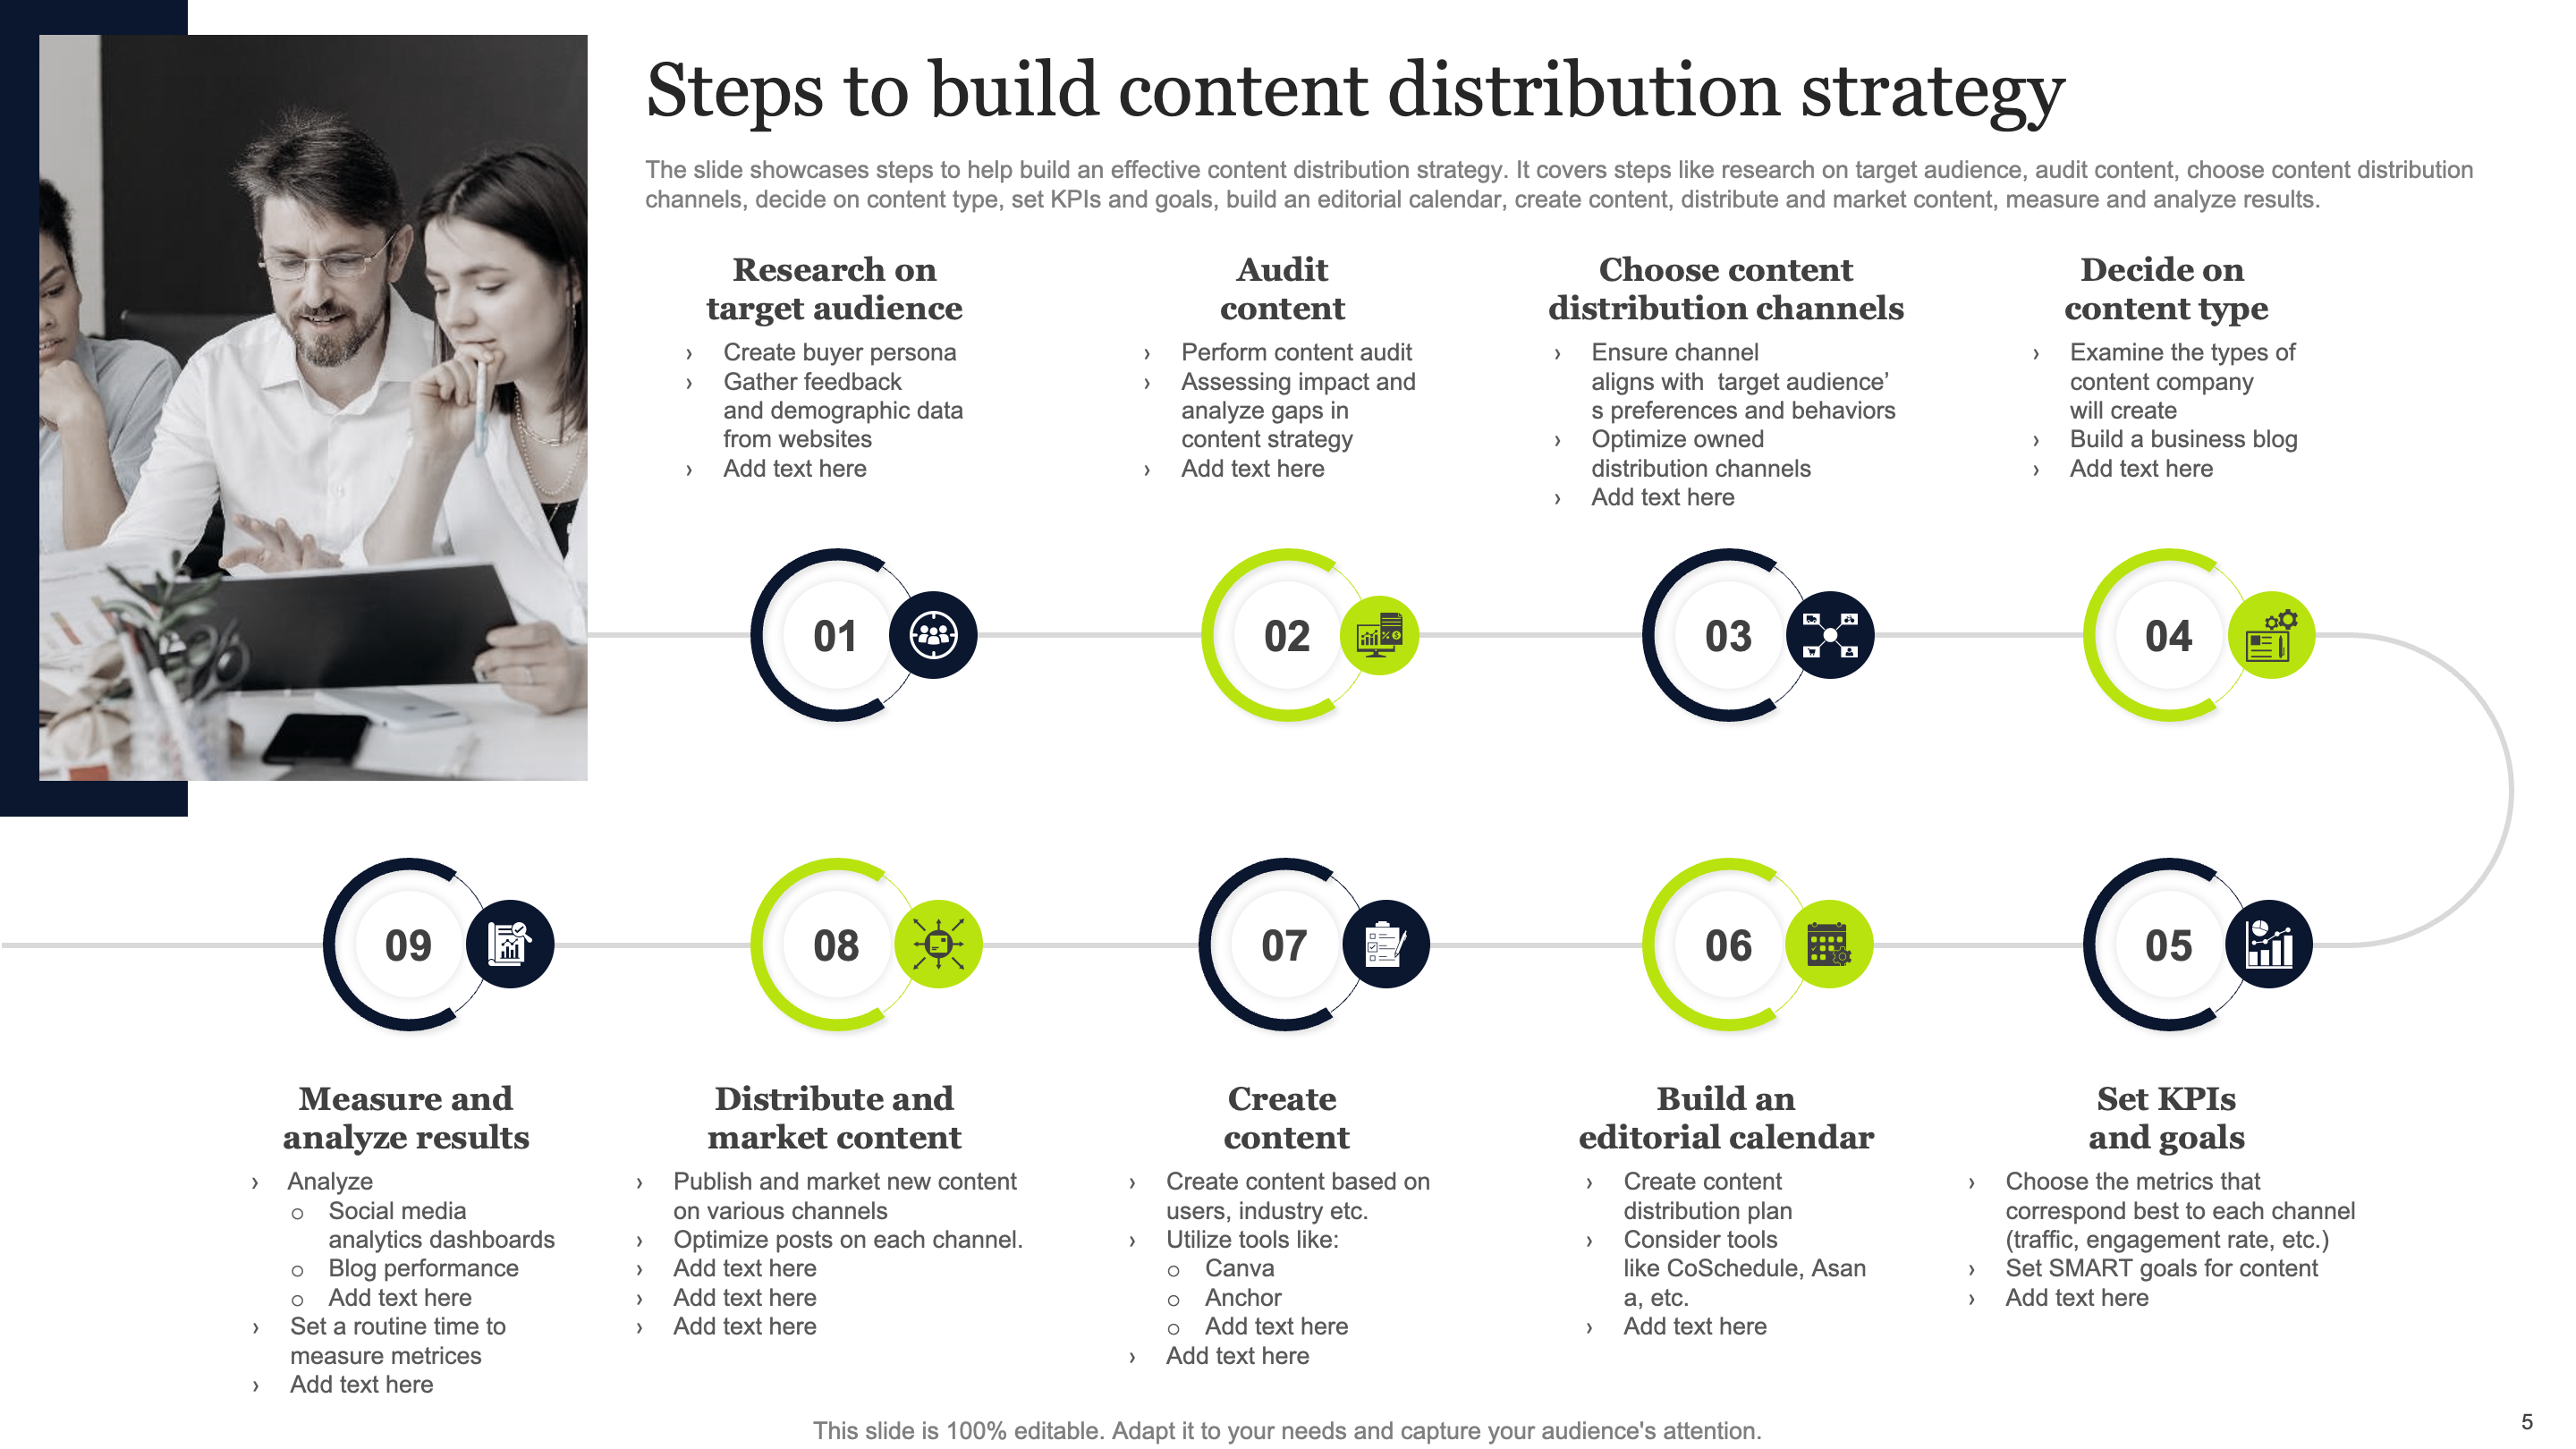 Steps to Build Content Distribution Strategy